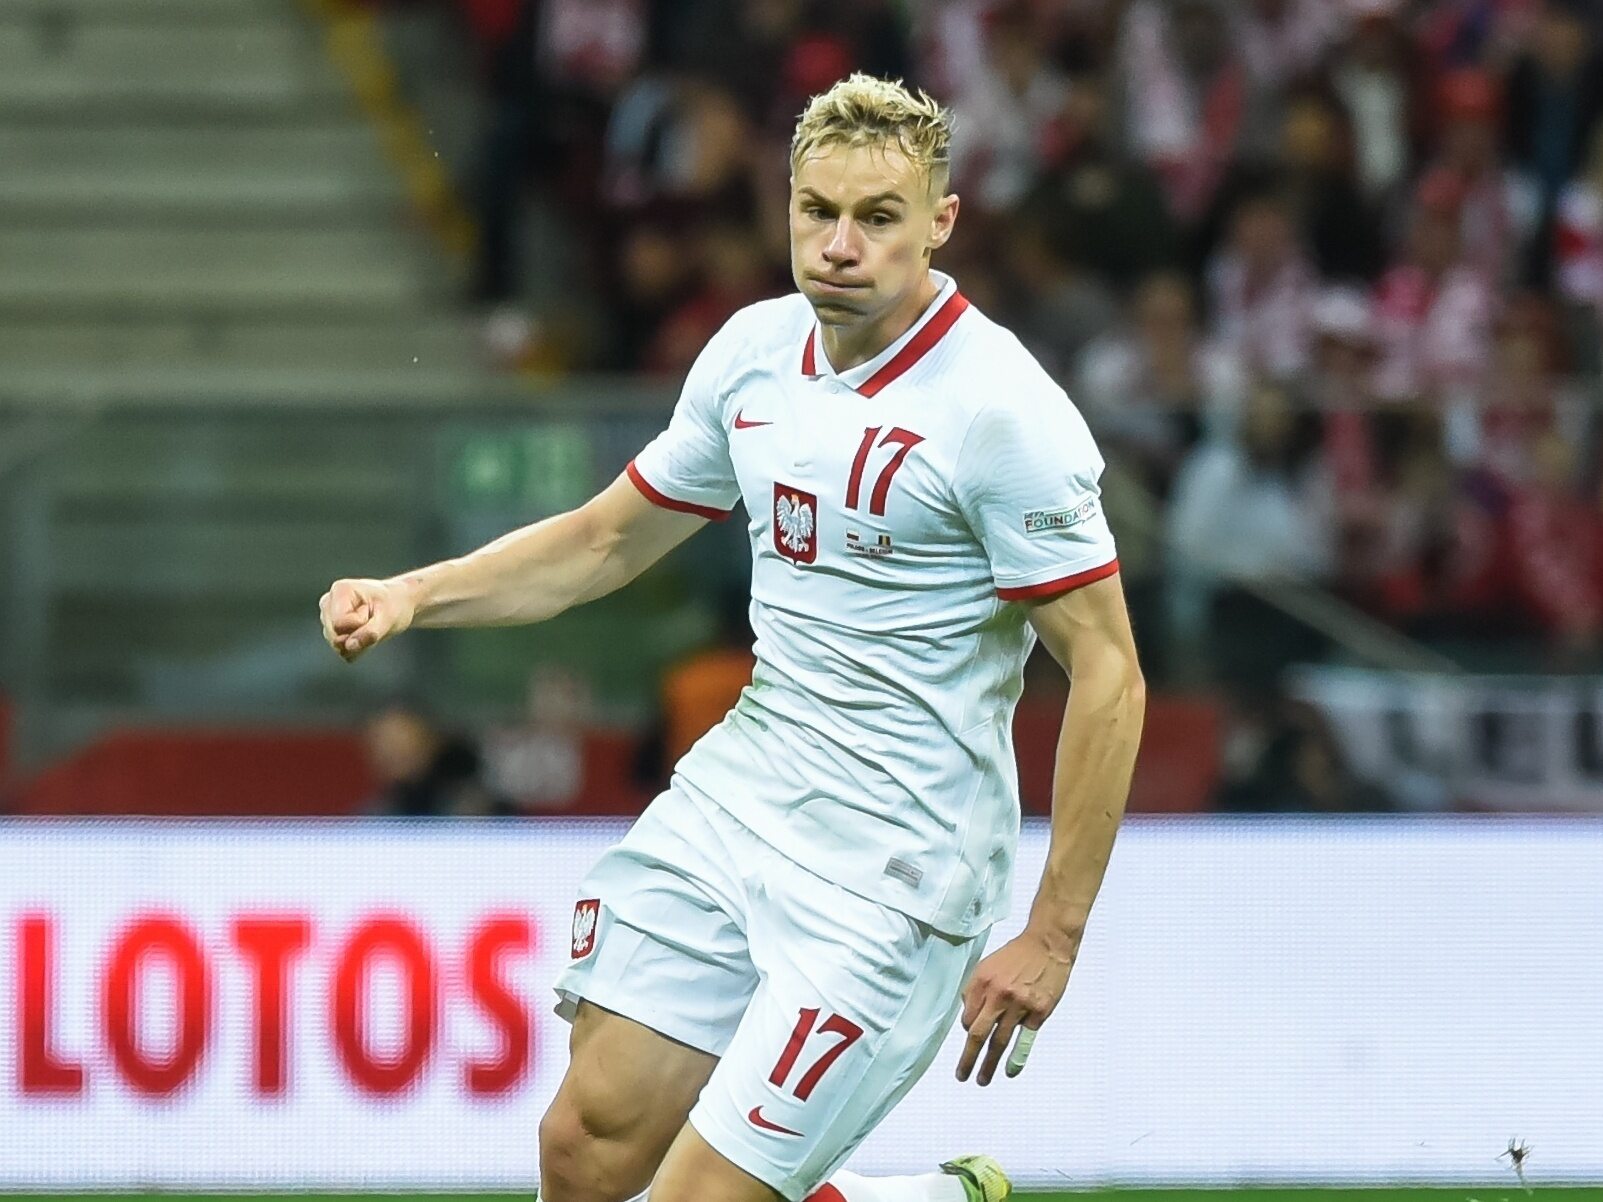 The Polish representative can play in Serie A again. His former team sees him at home